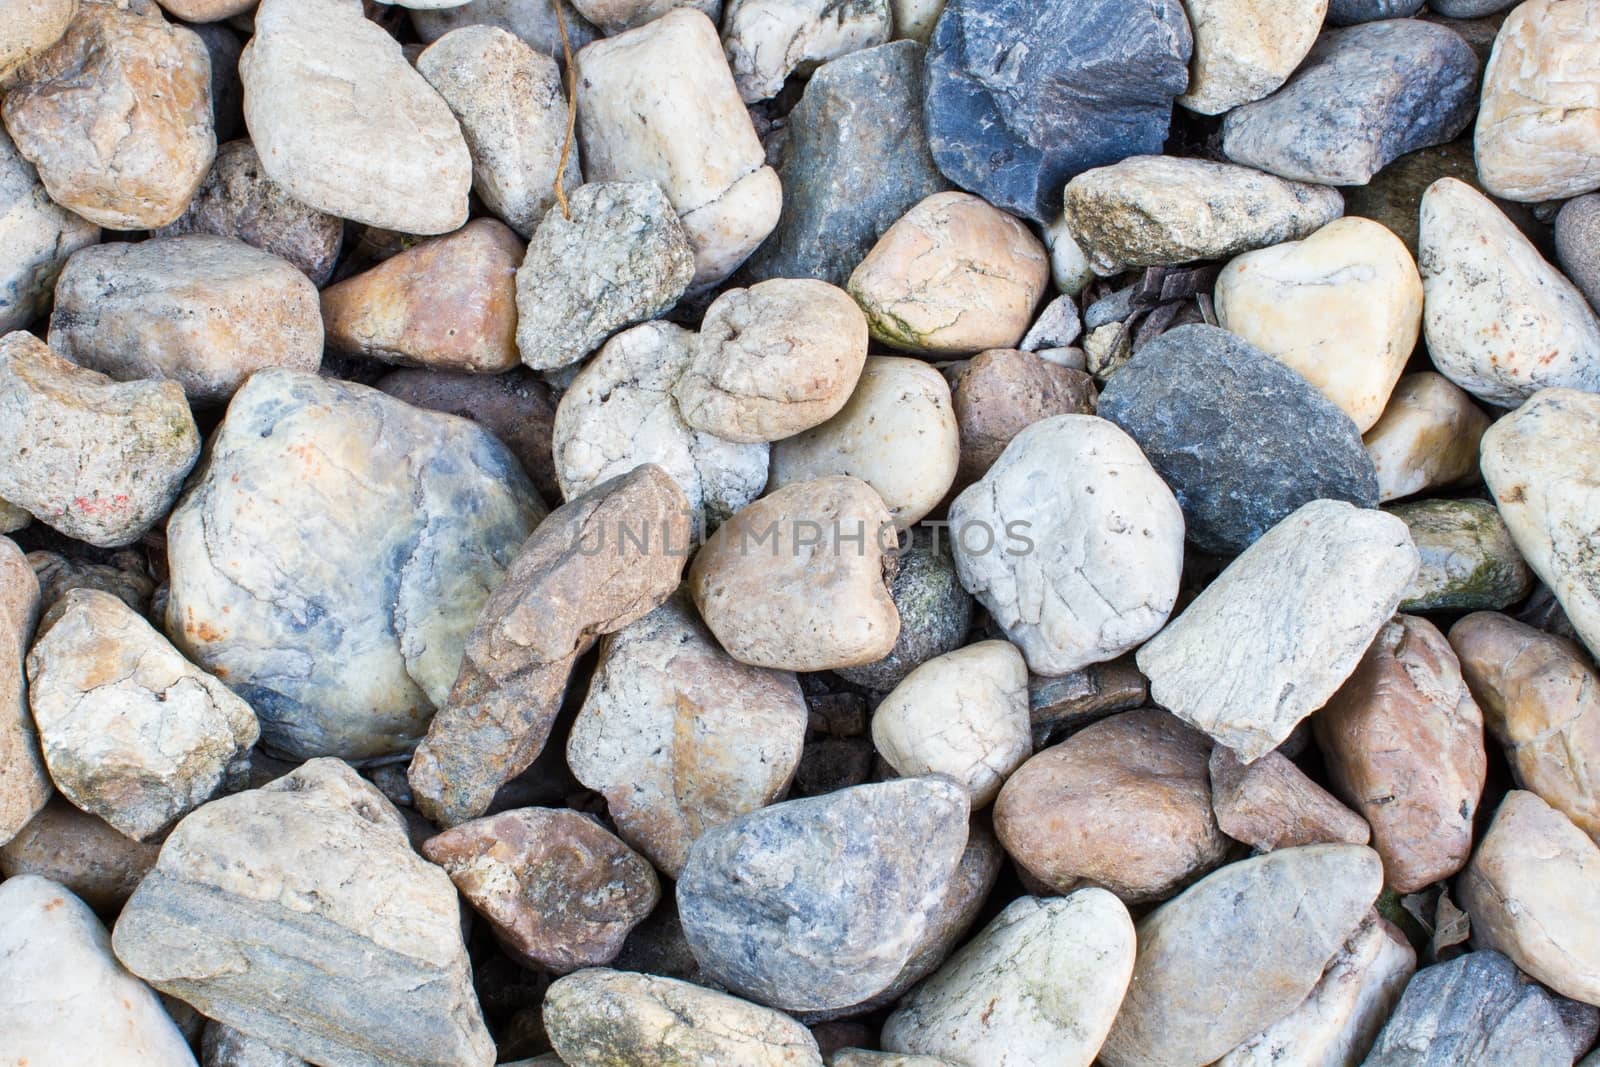 Pebbles as a background image on the ground by a3701027